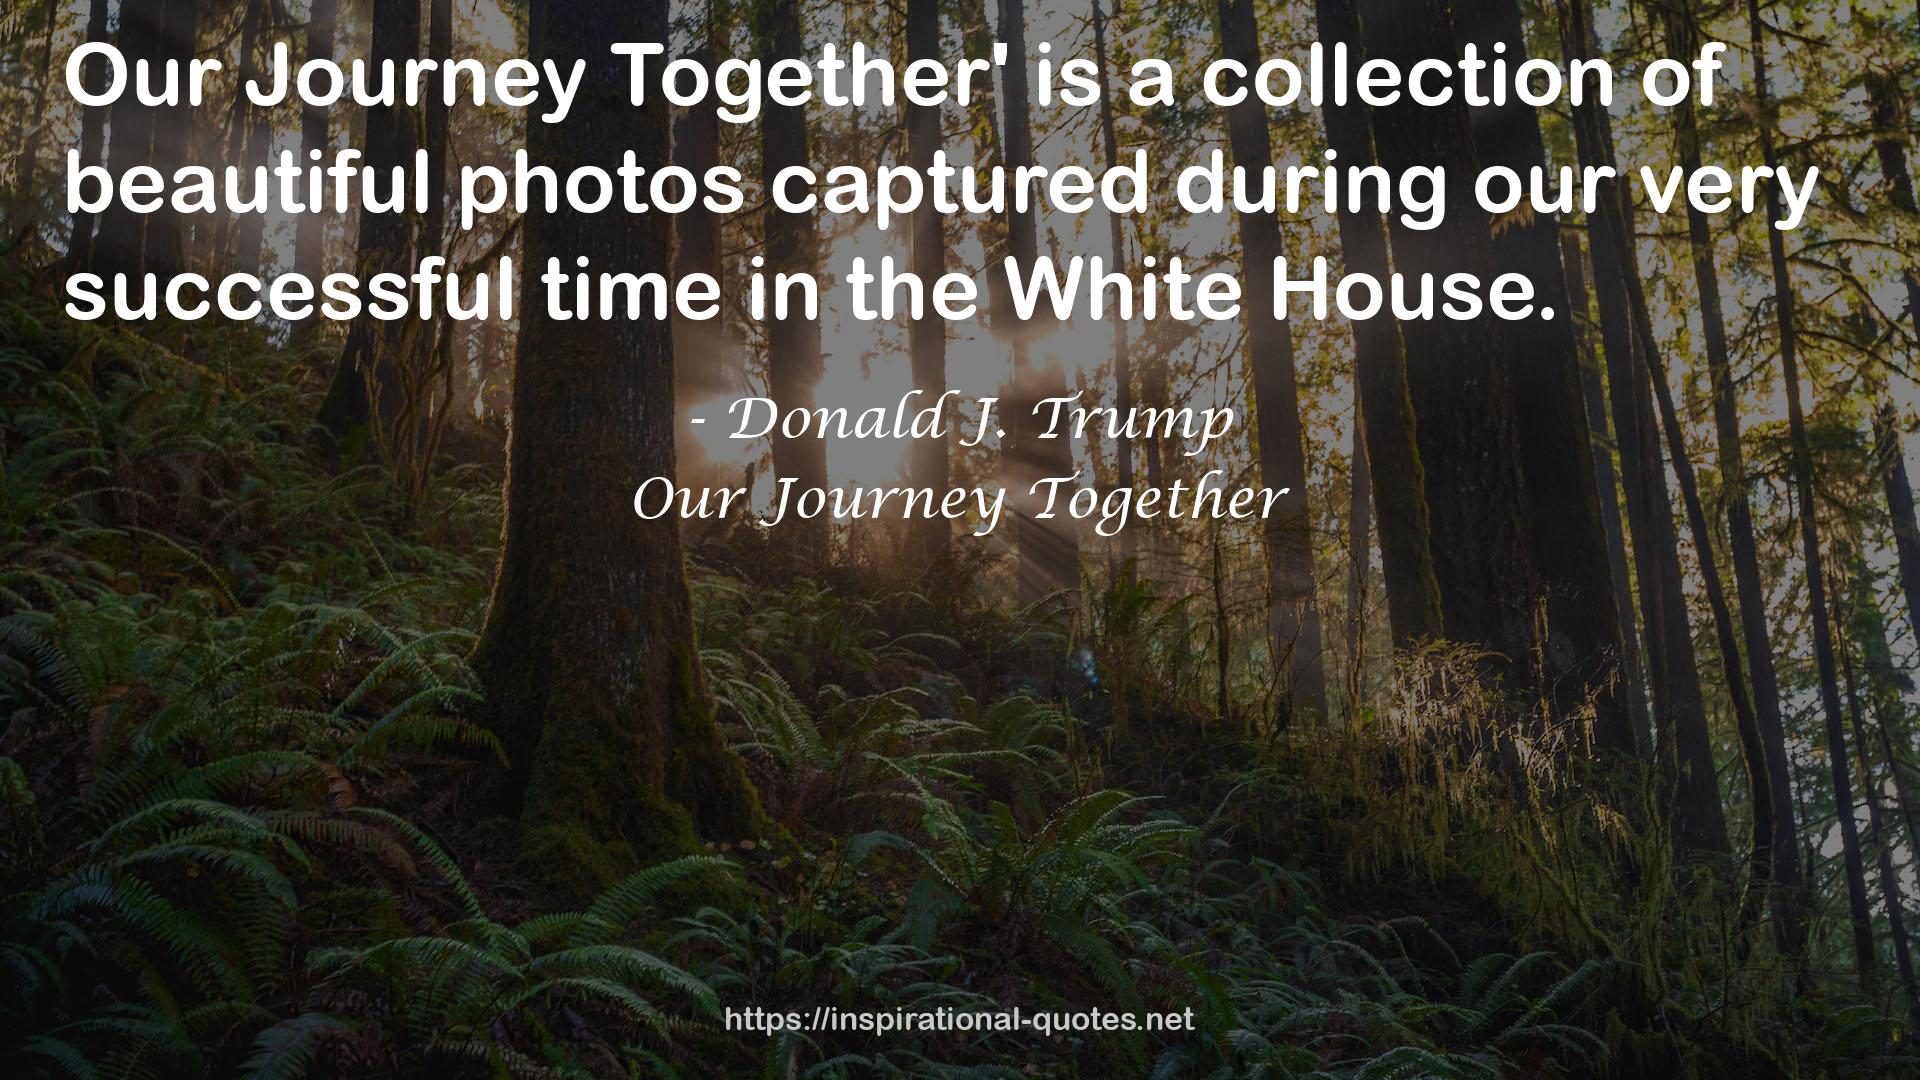 Our Journey Together QUOTES